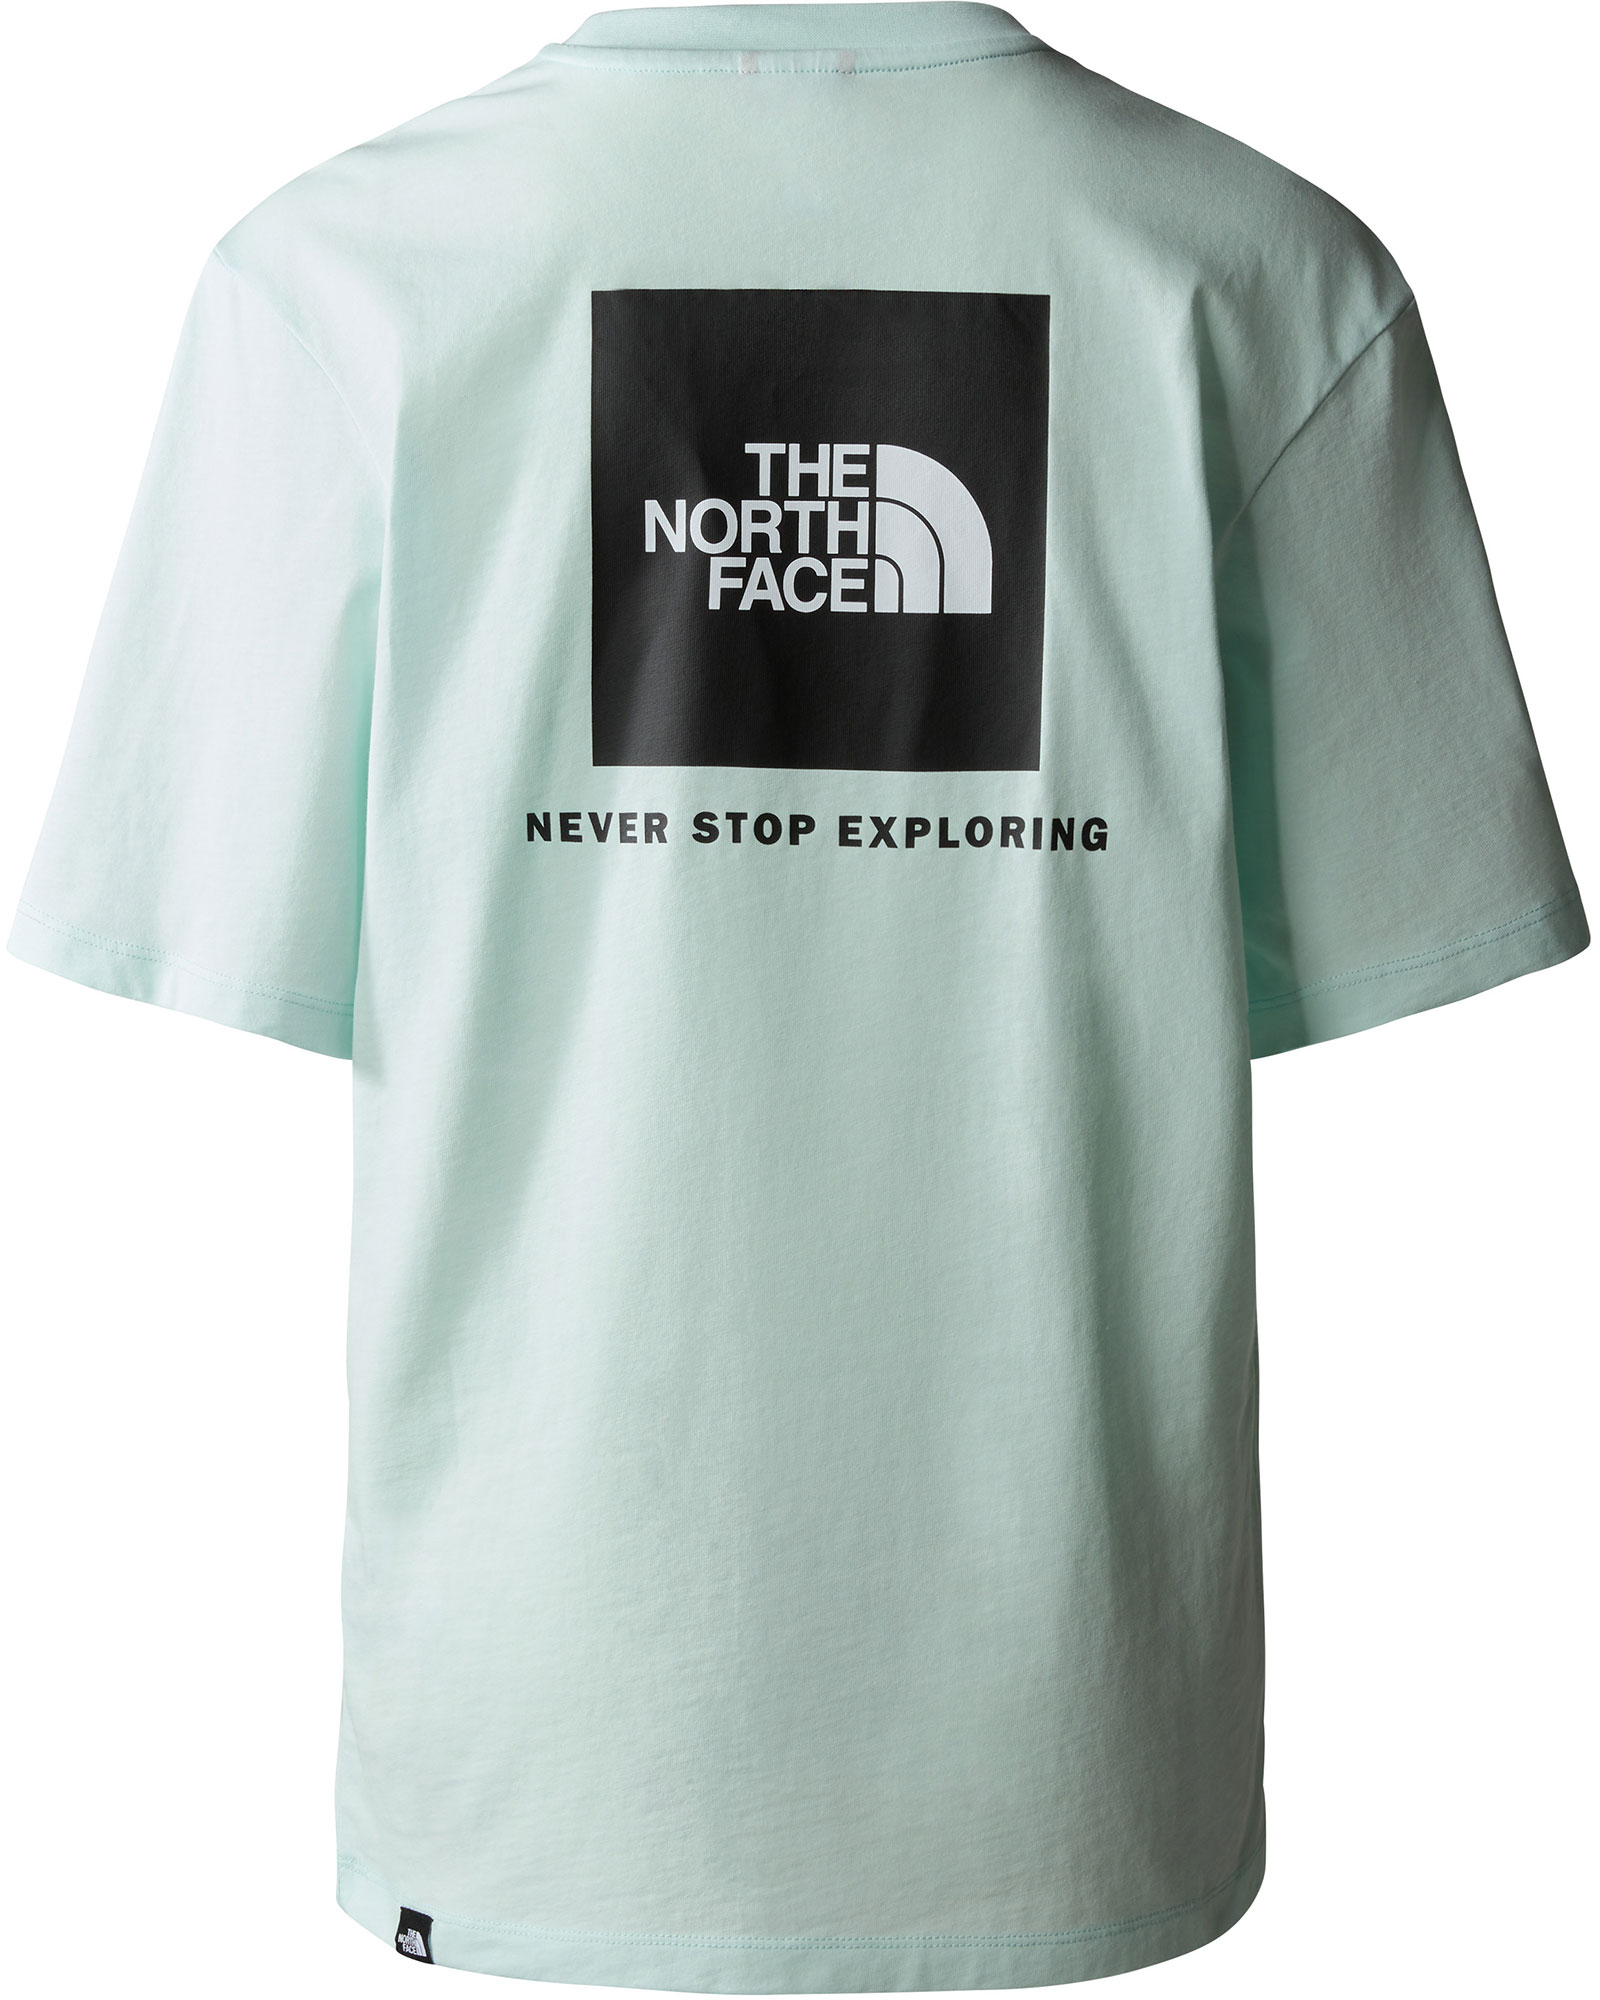 The North Face Relaxed Redbox Women’s T Shirt - Skylight Blue S